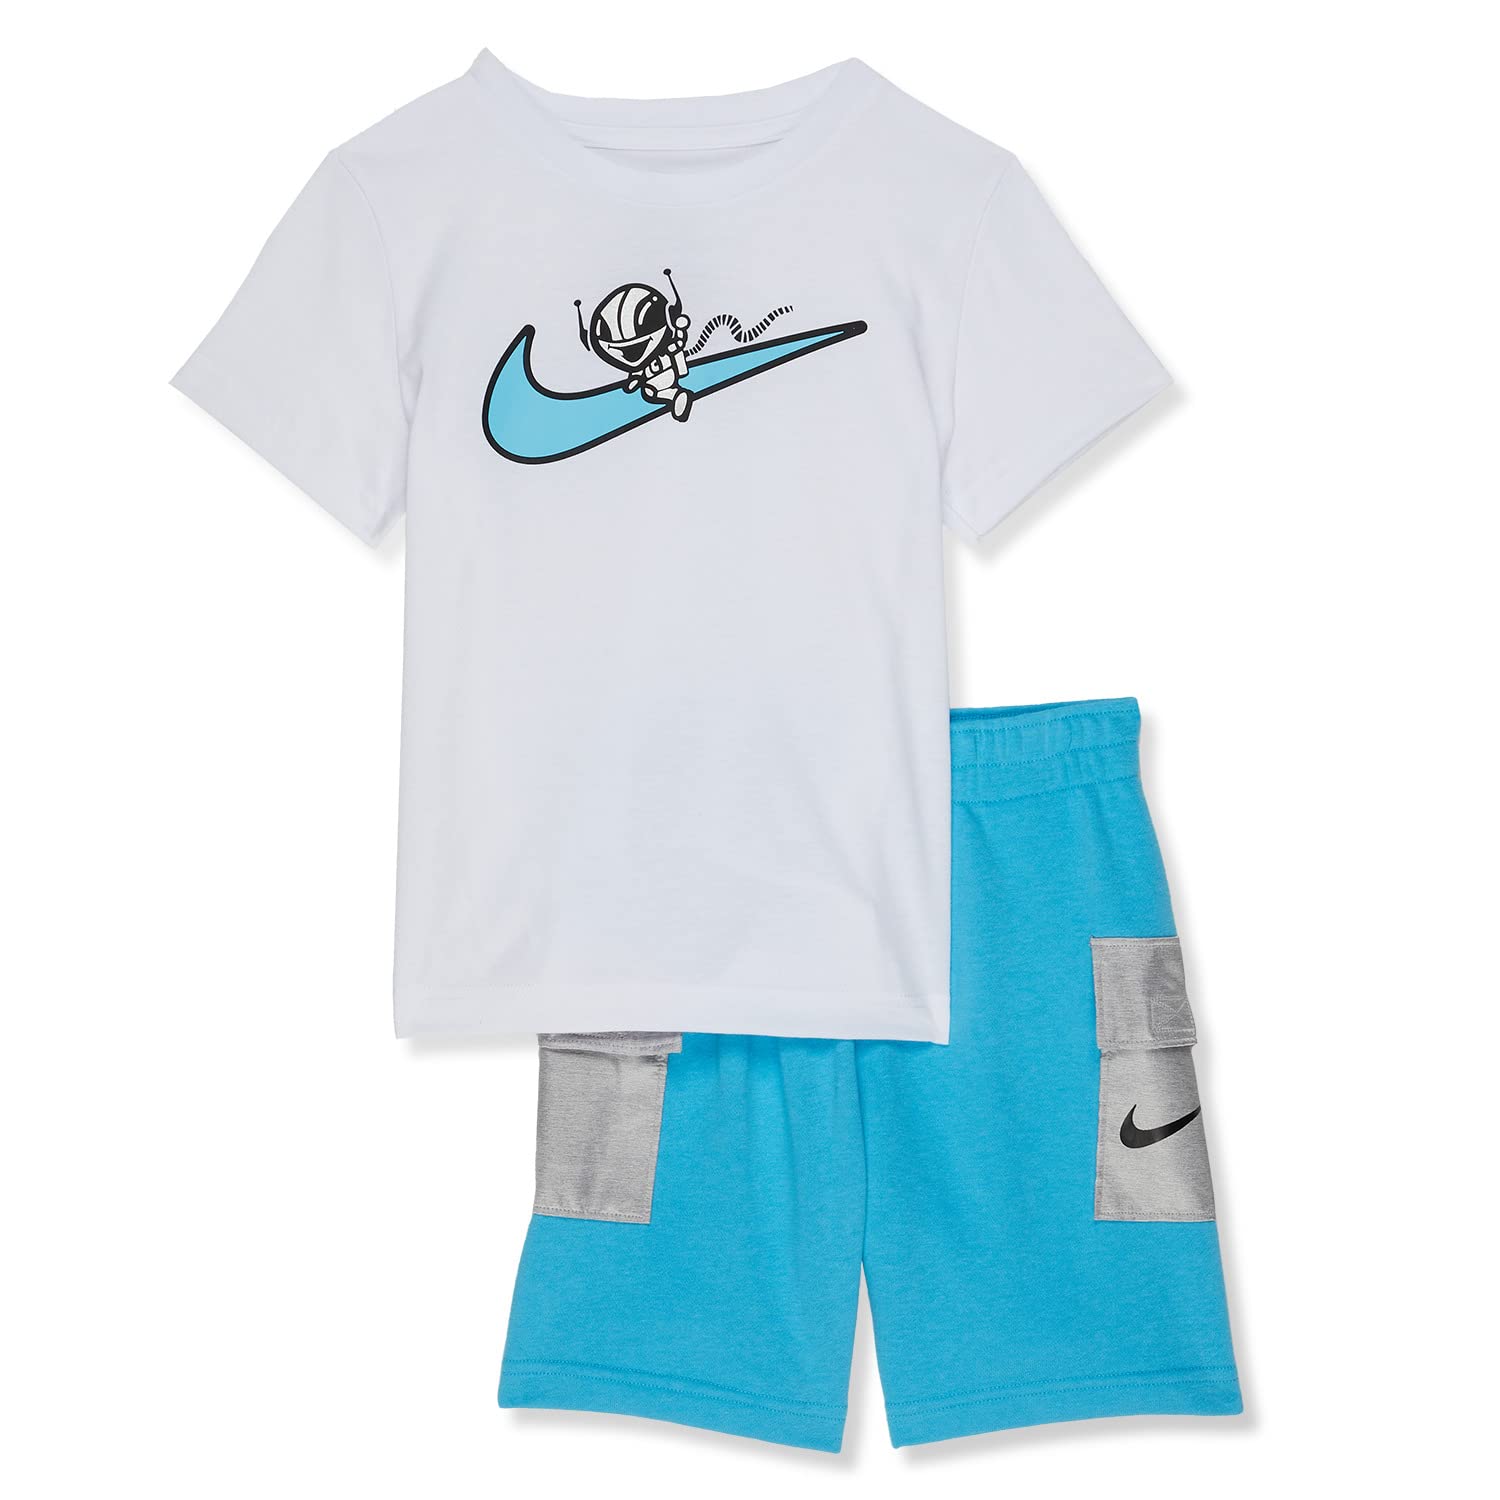 Image 1 of Tee and Shorts Set (Toddler)